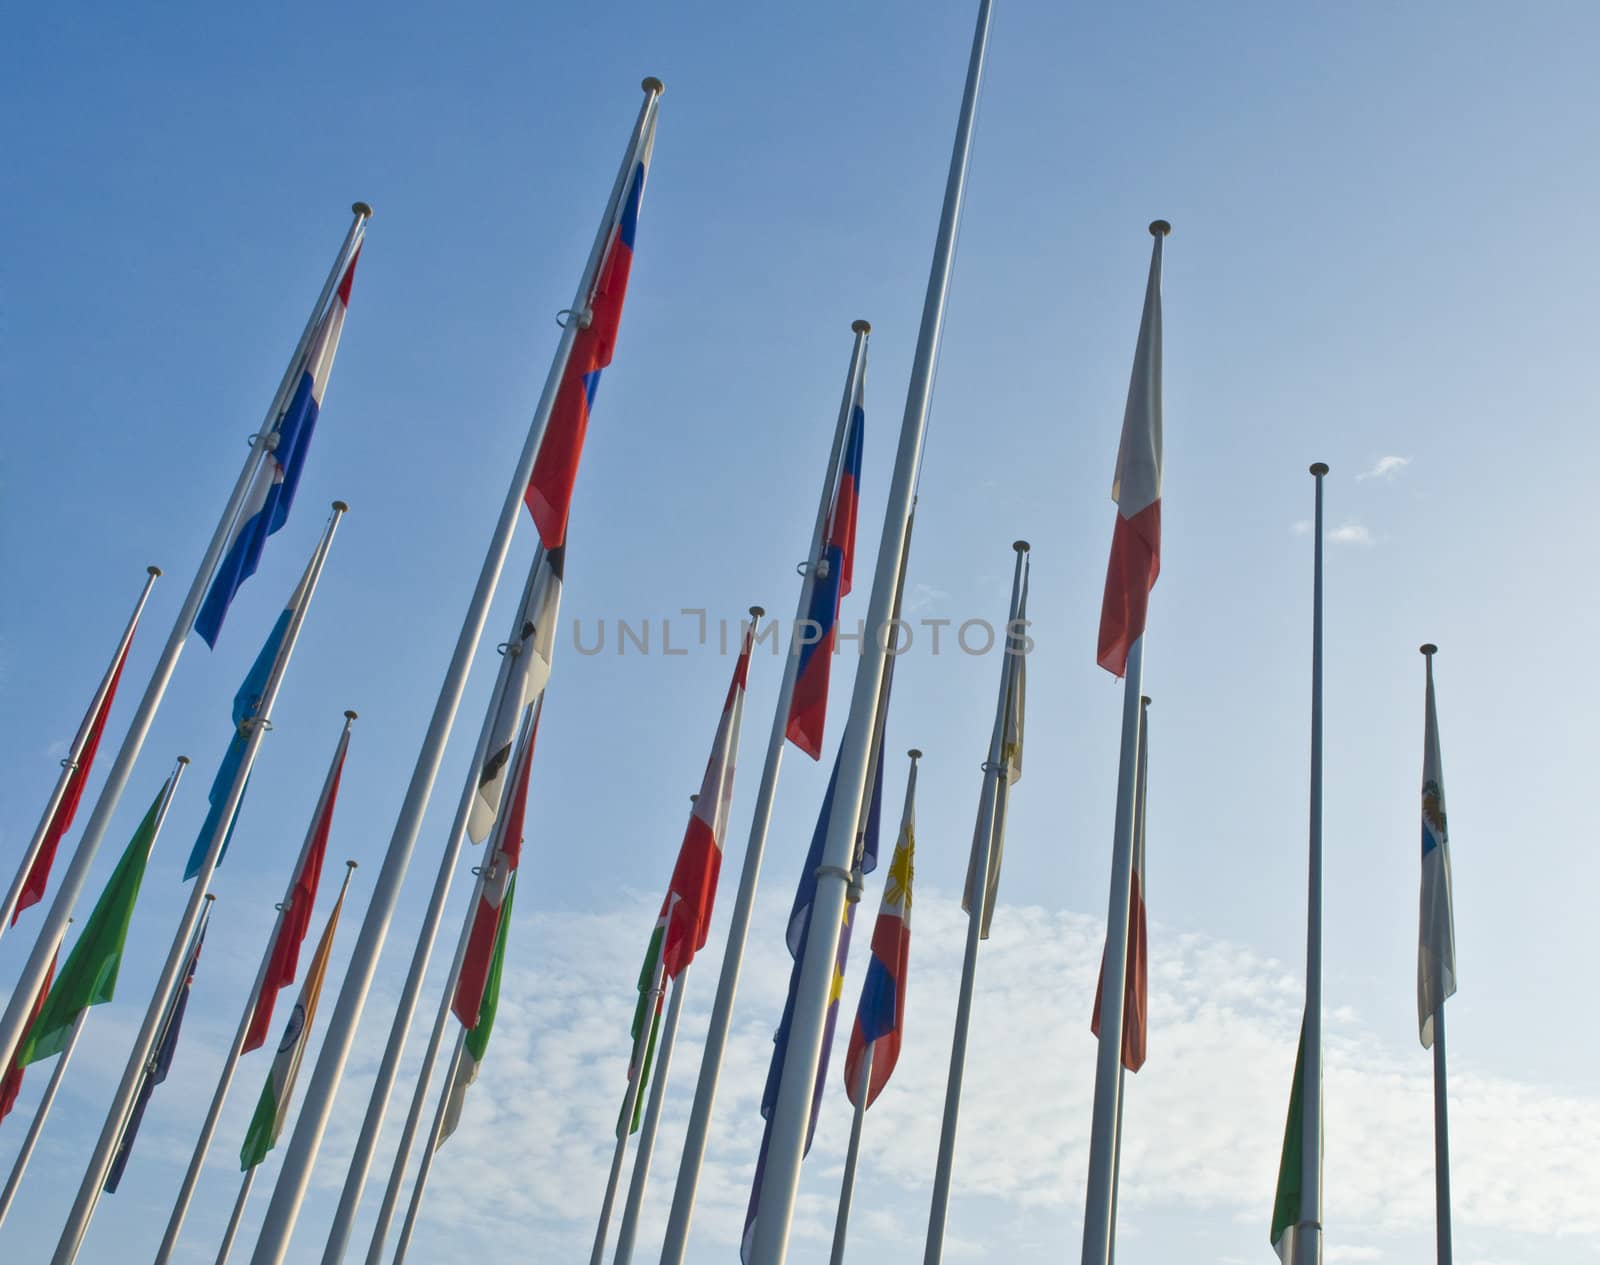 Flags of different nations to a fair